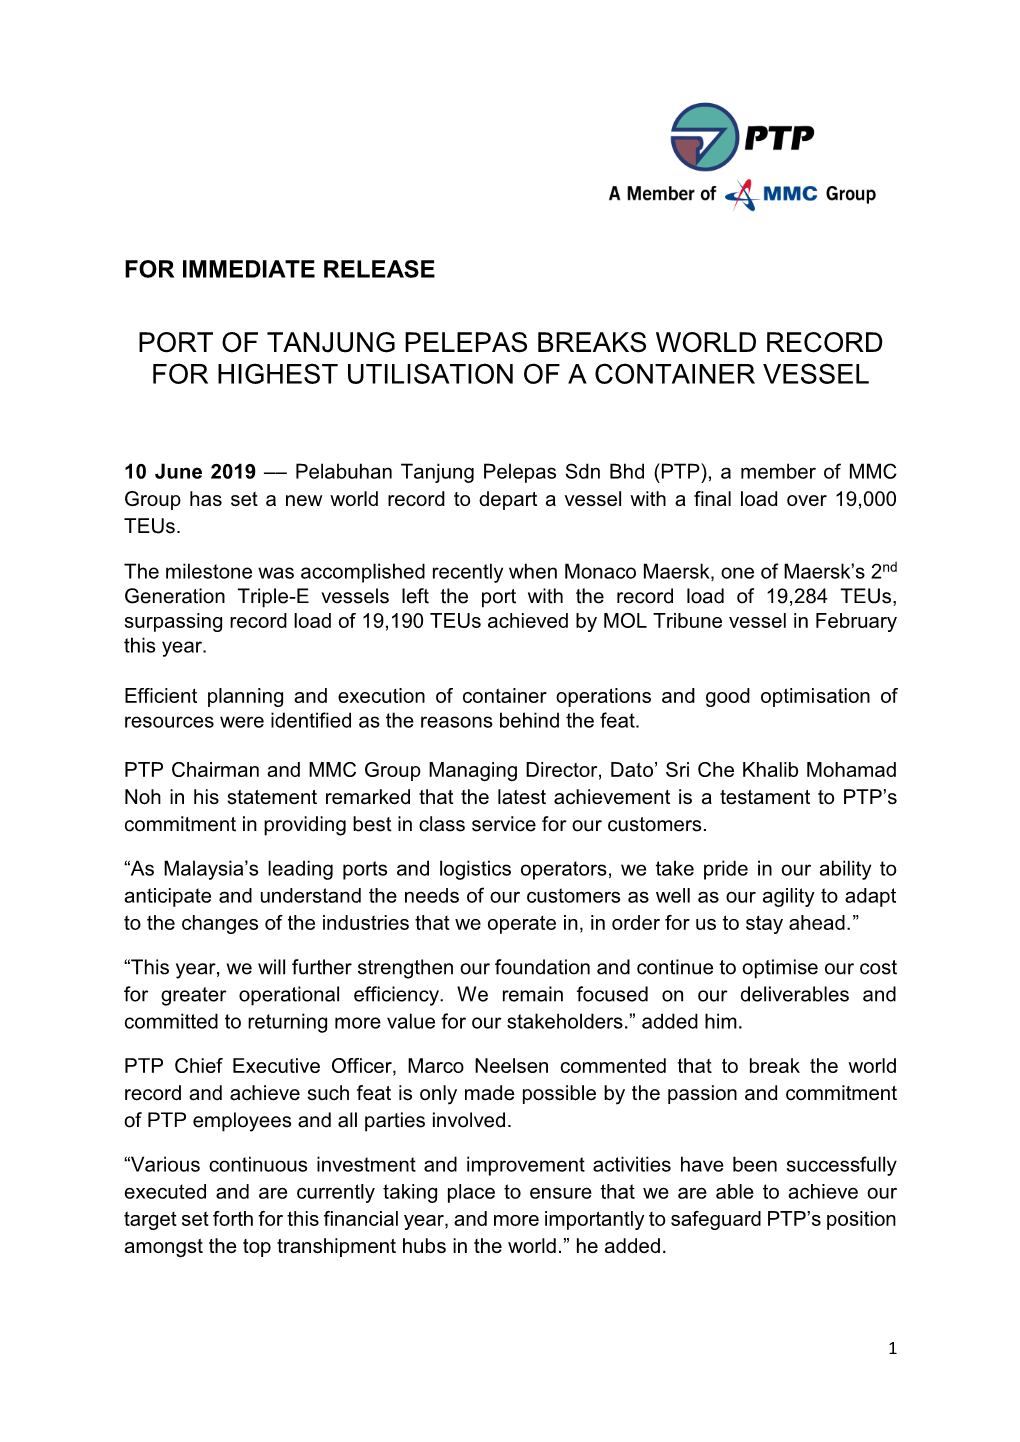 Port of Tanjung Pelepas Breaks World Record for Highest Utilisation of a Container Vessel